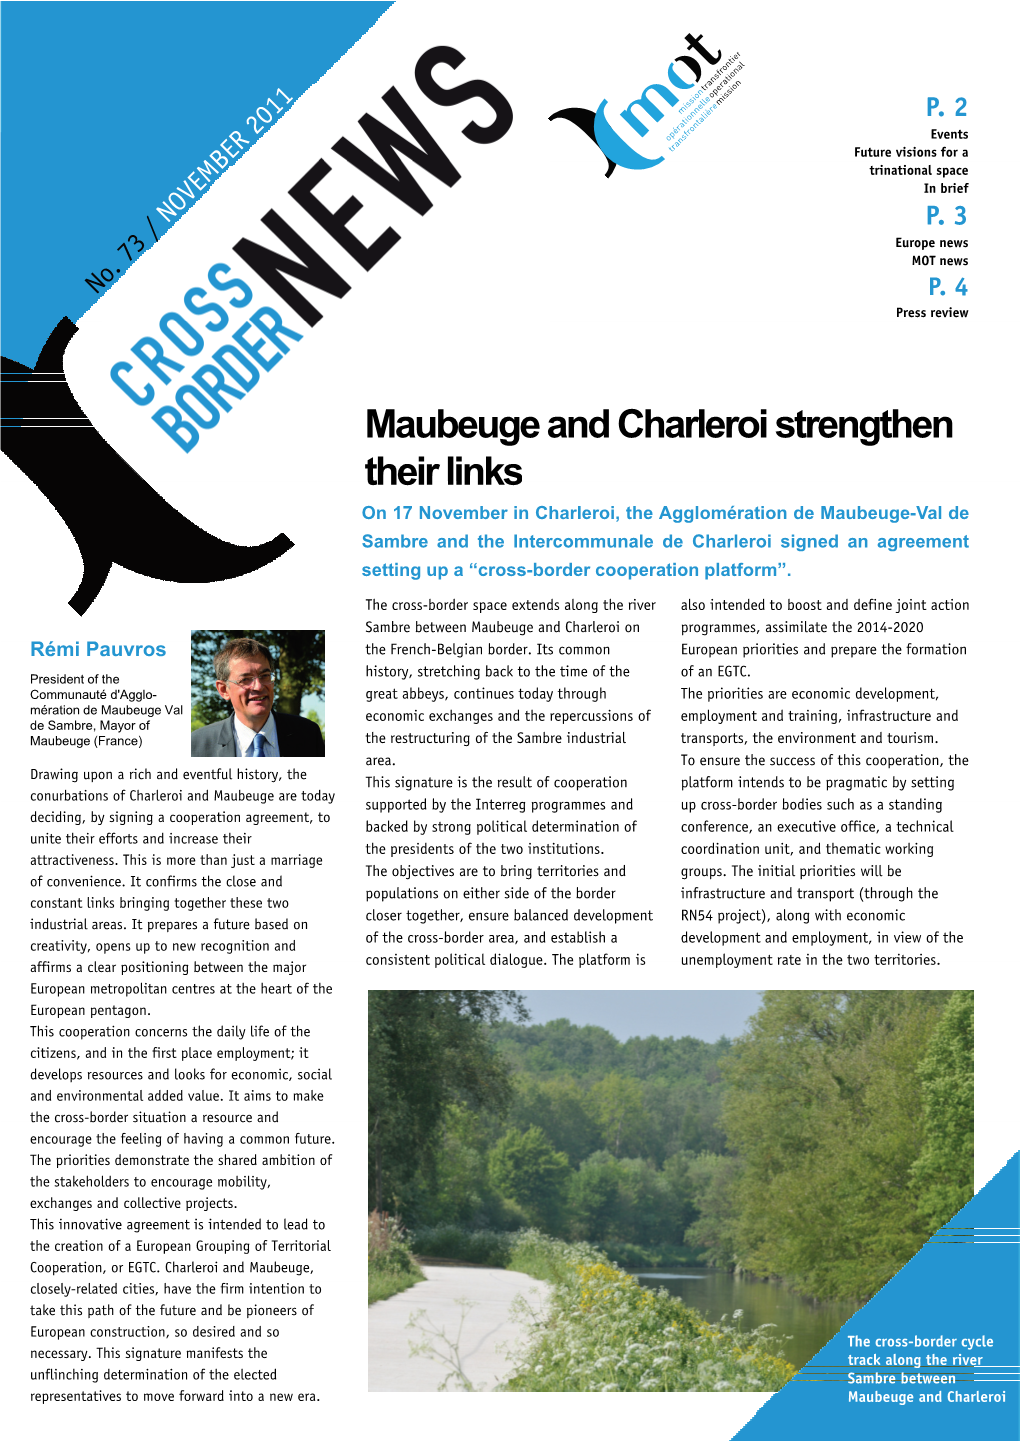 Maubeuge and Charleroi Strengthen Their Links